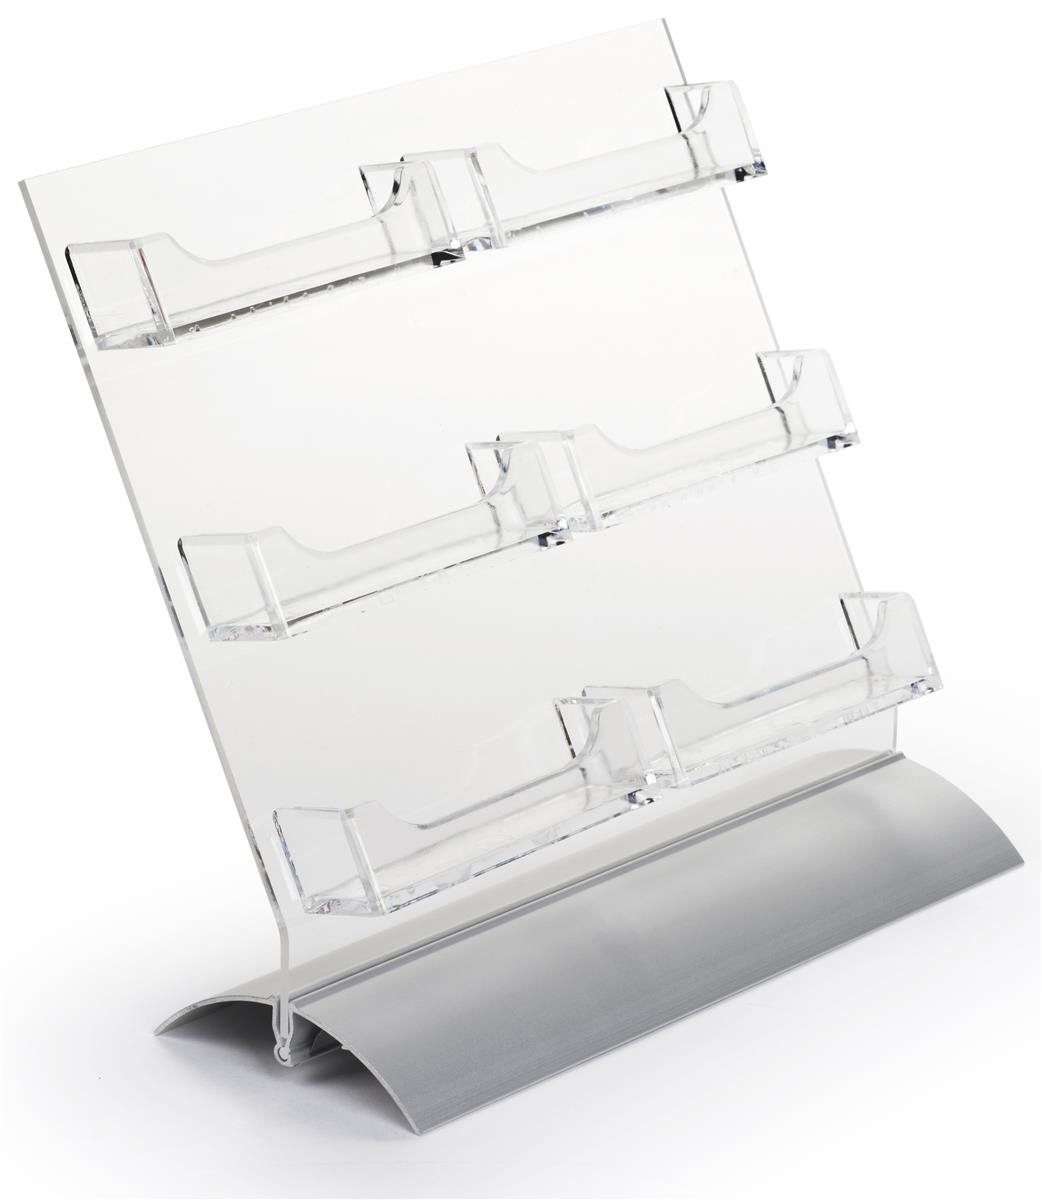 BOX OF 6 SINGLE COMPARTMENT BUSINESS CARD HOLDER TRANSPARENT ACRYLIC DISPENSER 